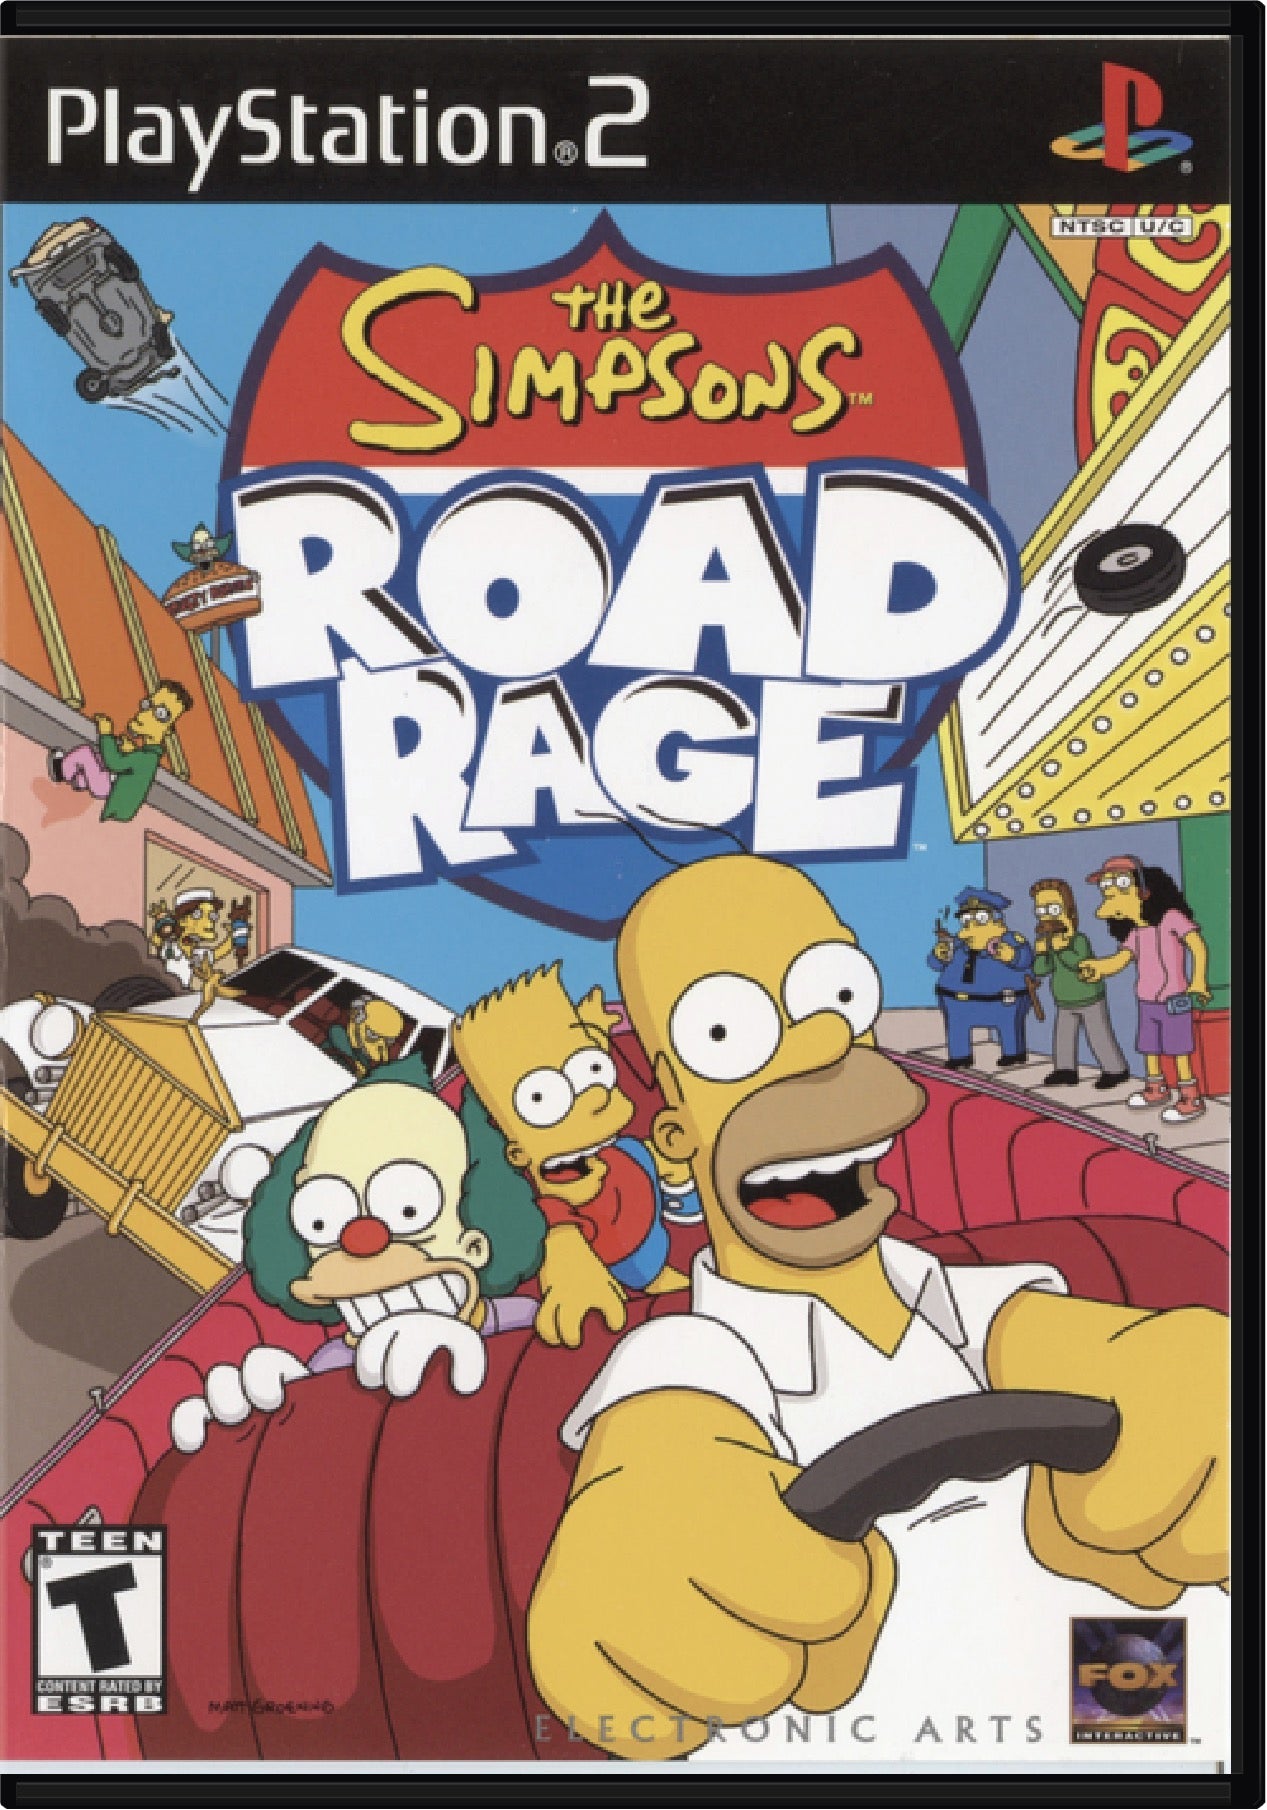 The Simpsons Road Rage Cover Art and Product Photo